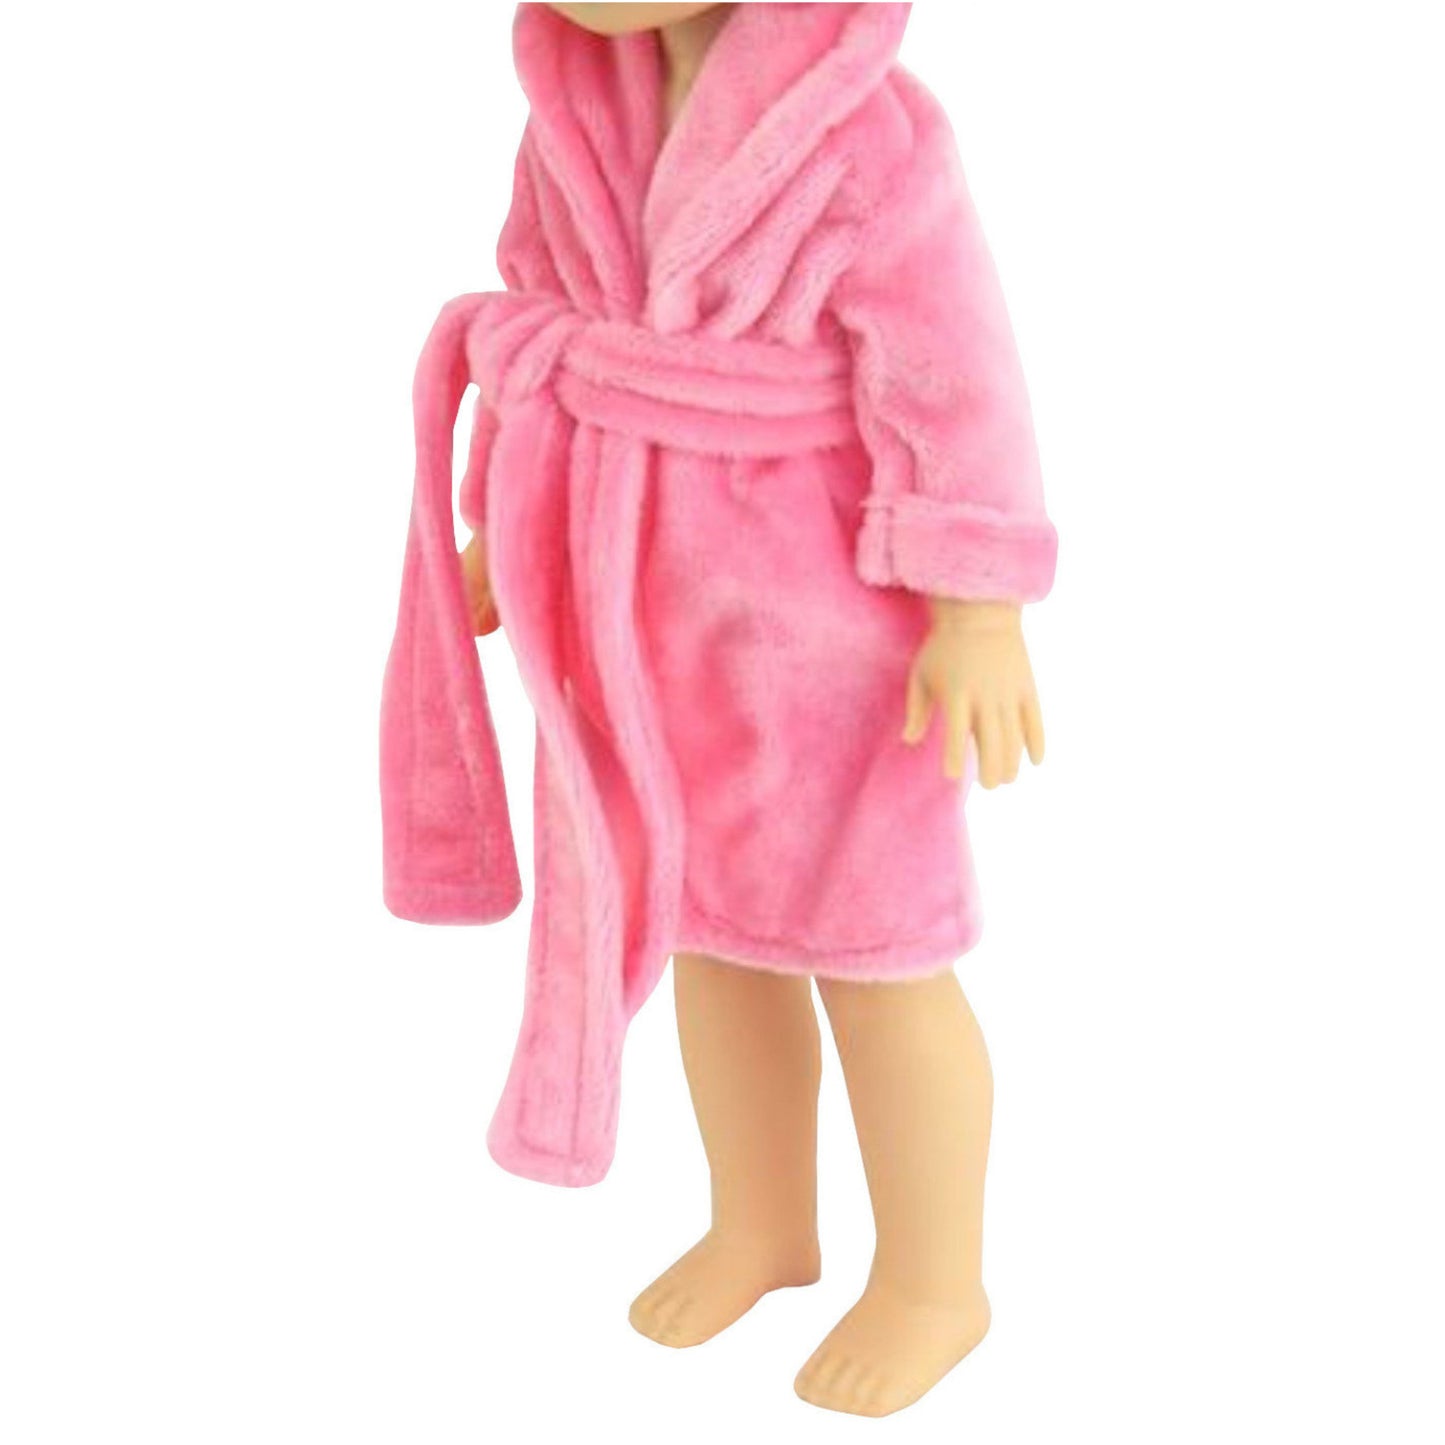 Pink Bathrobe for 14 1/2-inch dolls with doll Side View